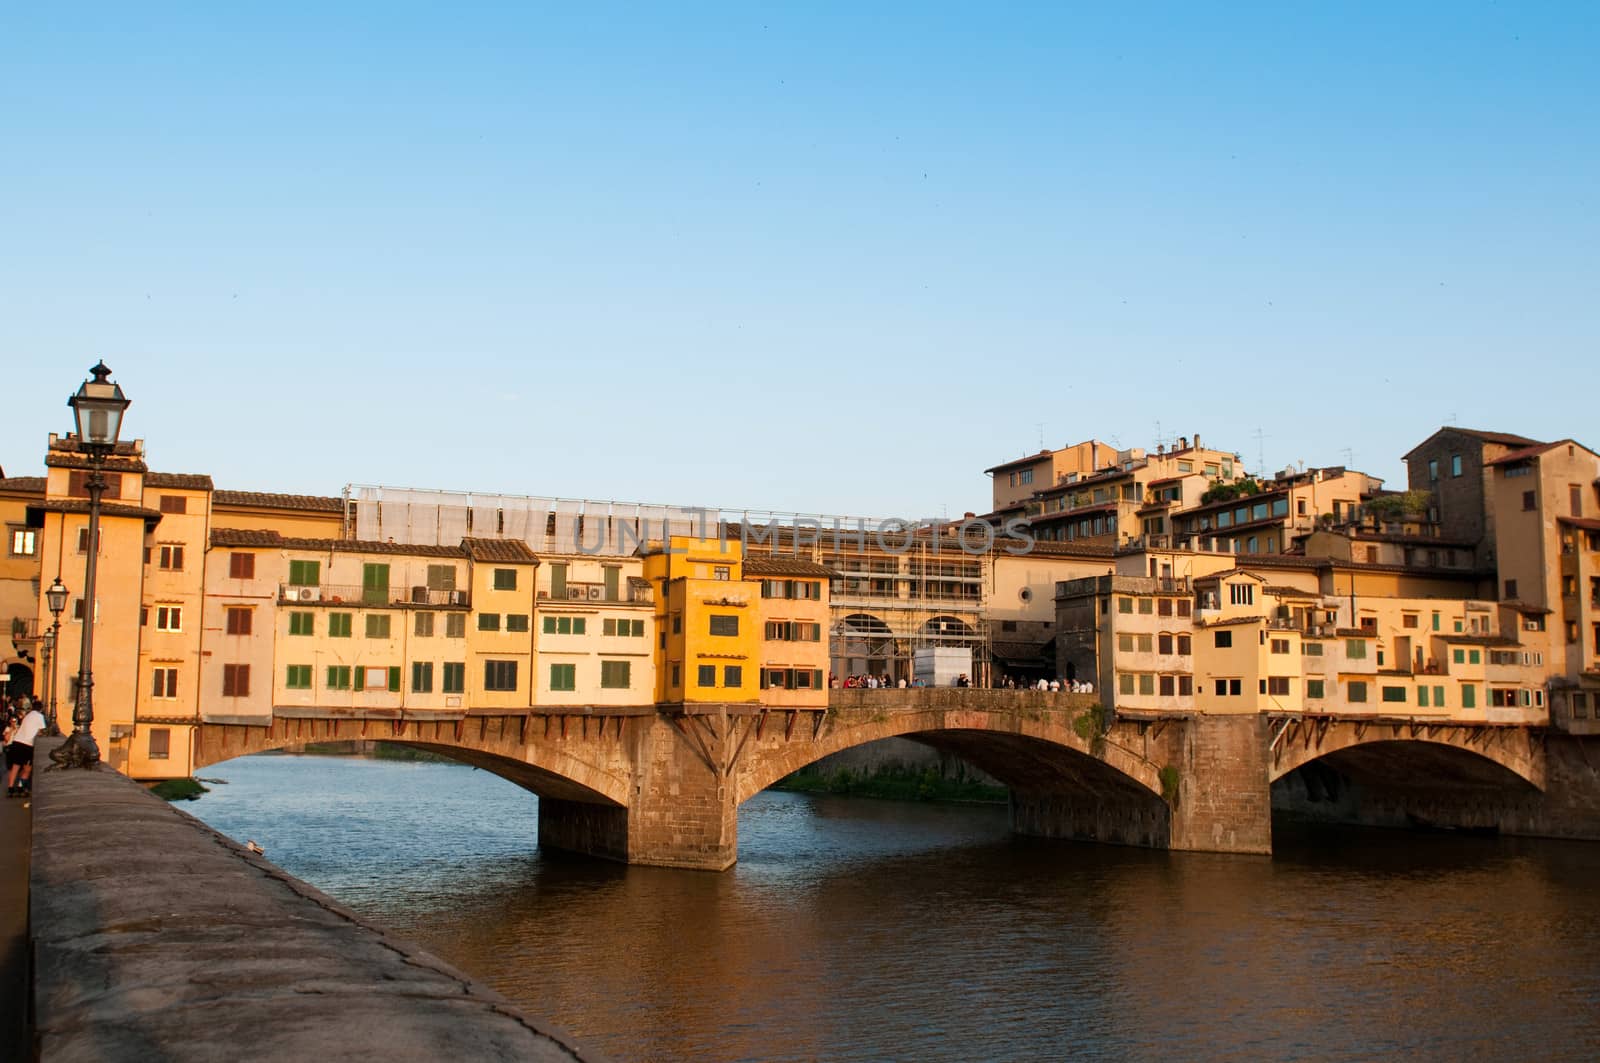 Crowds of tourists visit the Ponte Vecchio ("Old Bridge") which is a Medieval bridge over the Arno River at evening.  Florence, Tuscany, Italy. by lexan